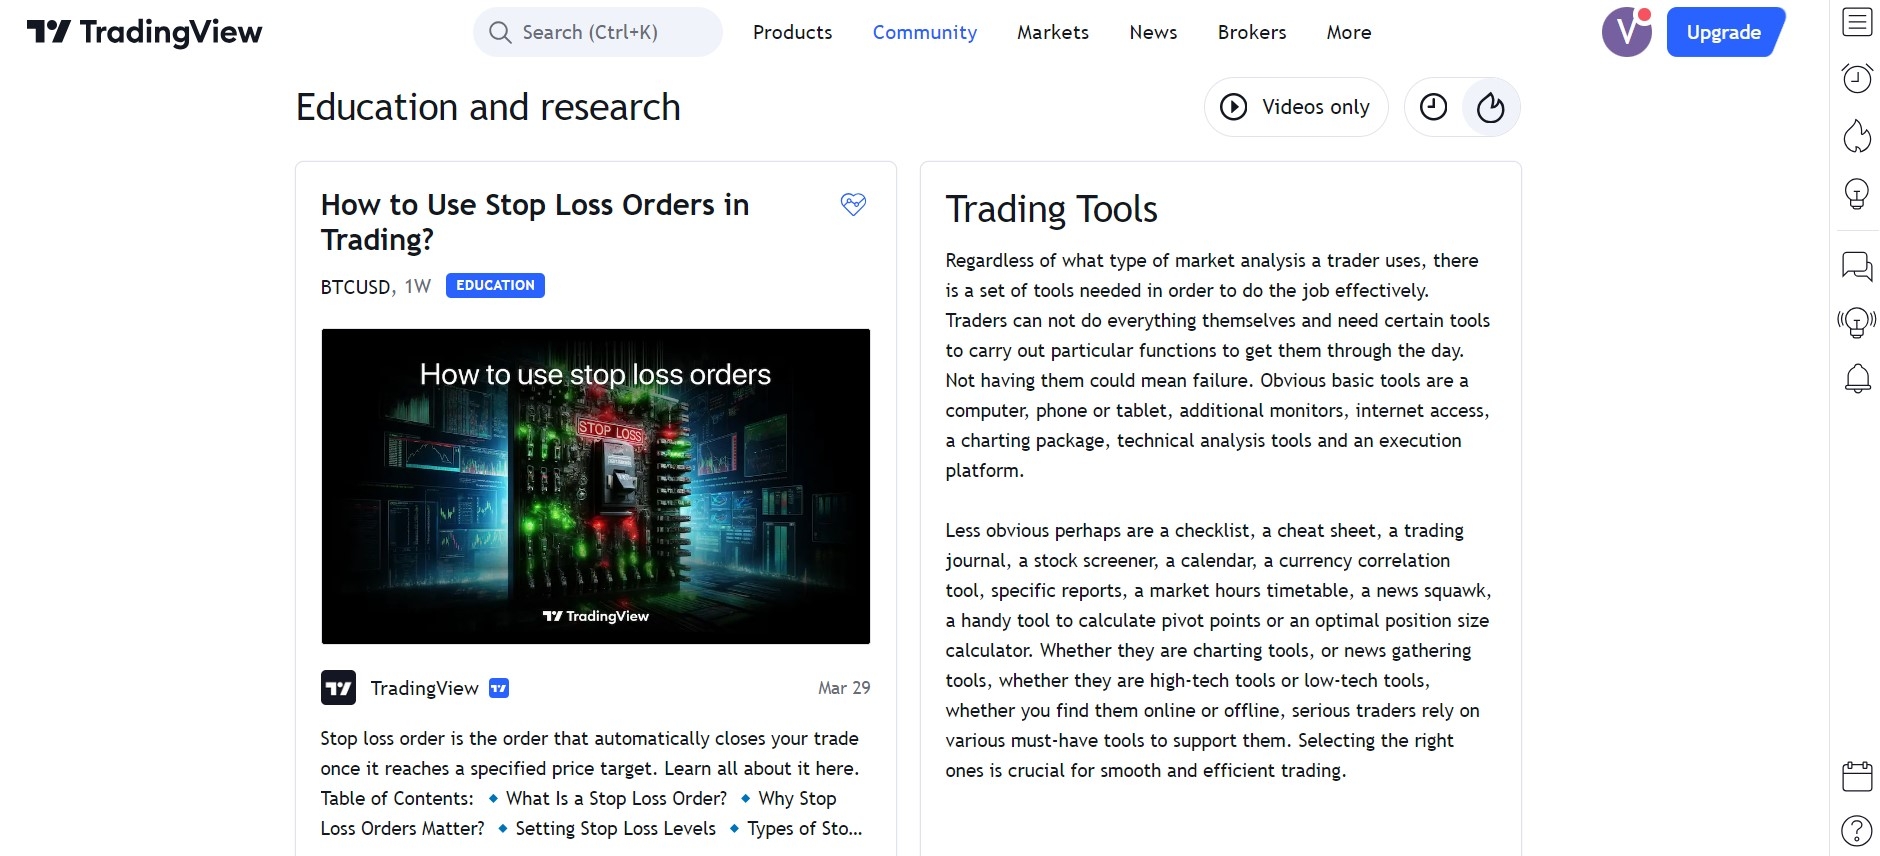 TradingView Education and research